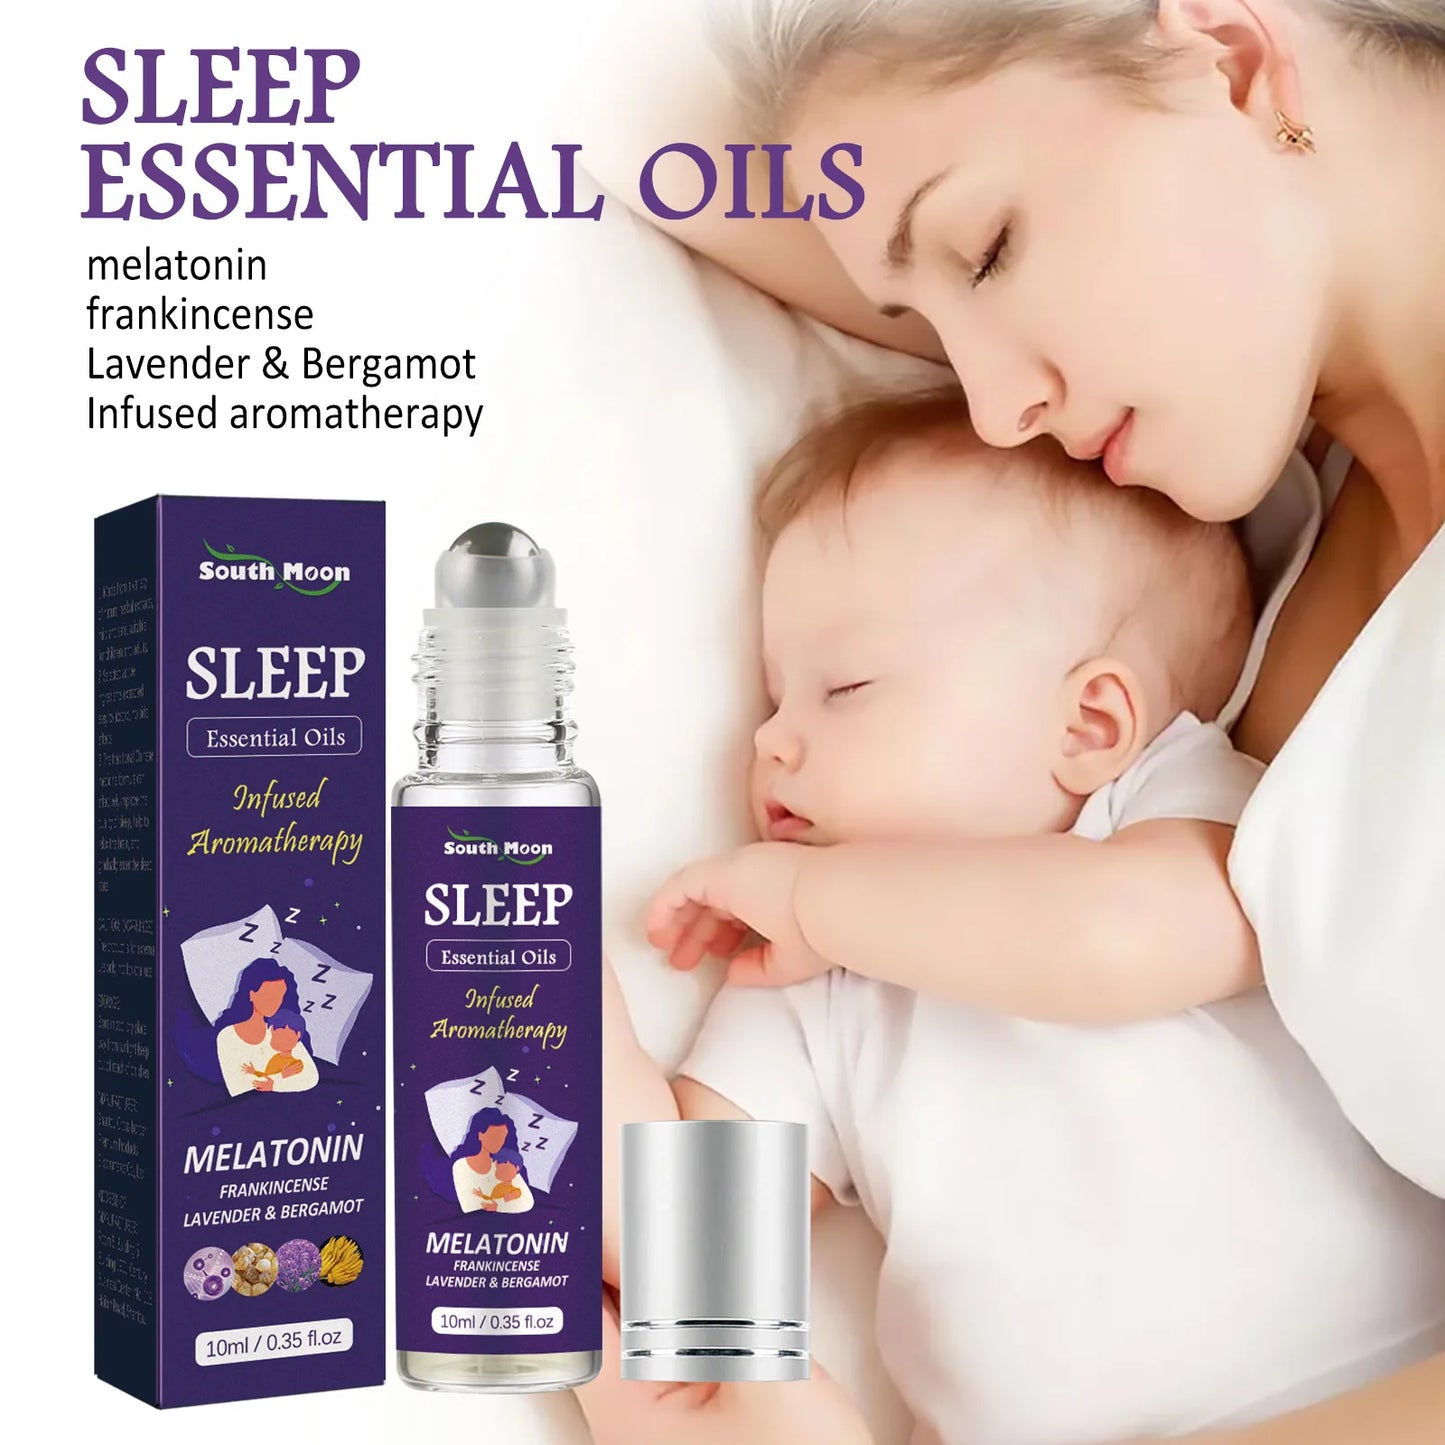 South Moon essential Oil for Deep Sleep Soothing Mood Relieve Anxiety Improve Insomnia Relax Aromatherapy Lavender Sleep Aid Oil